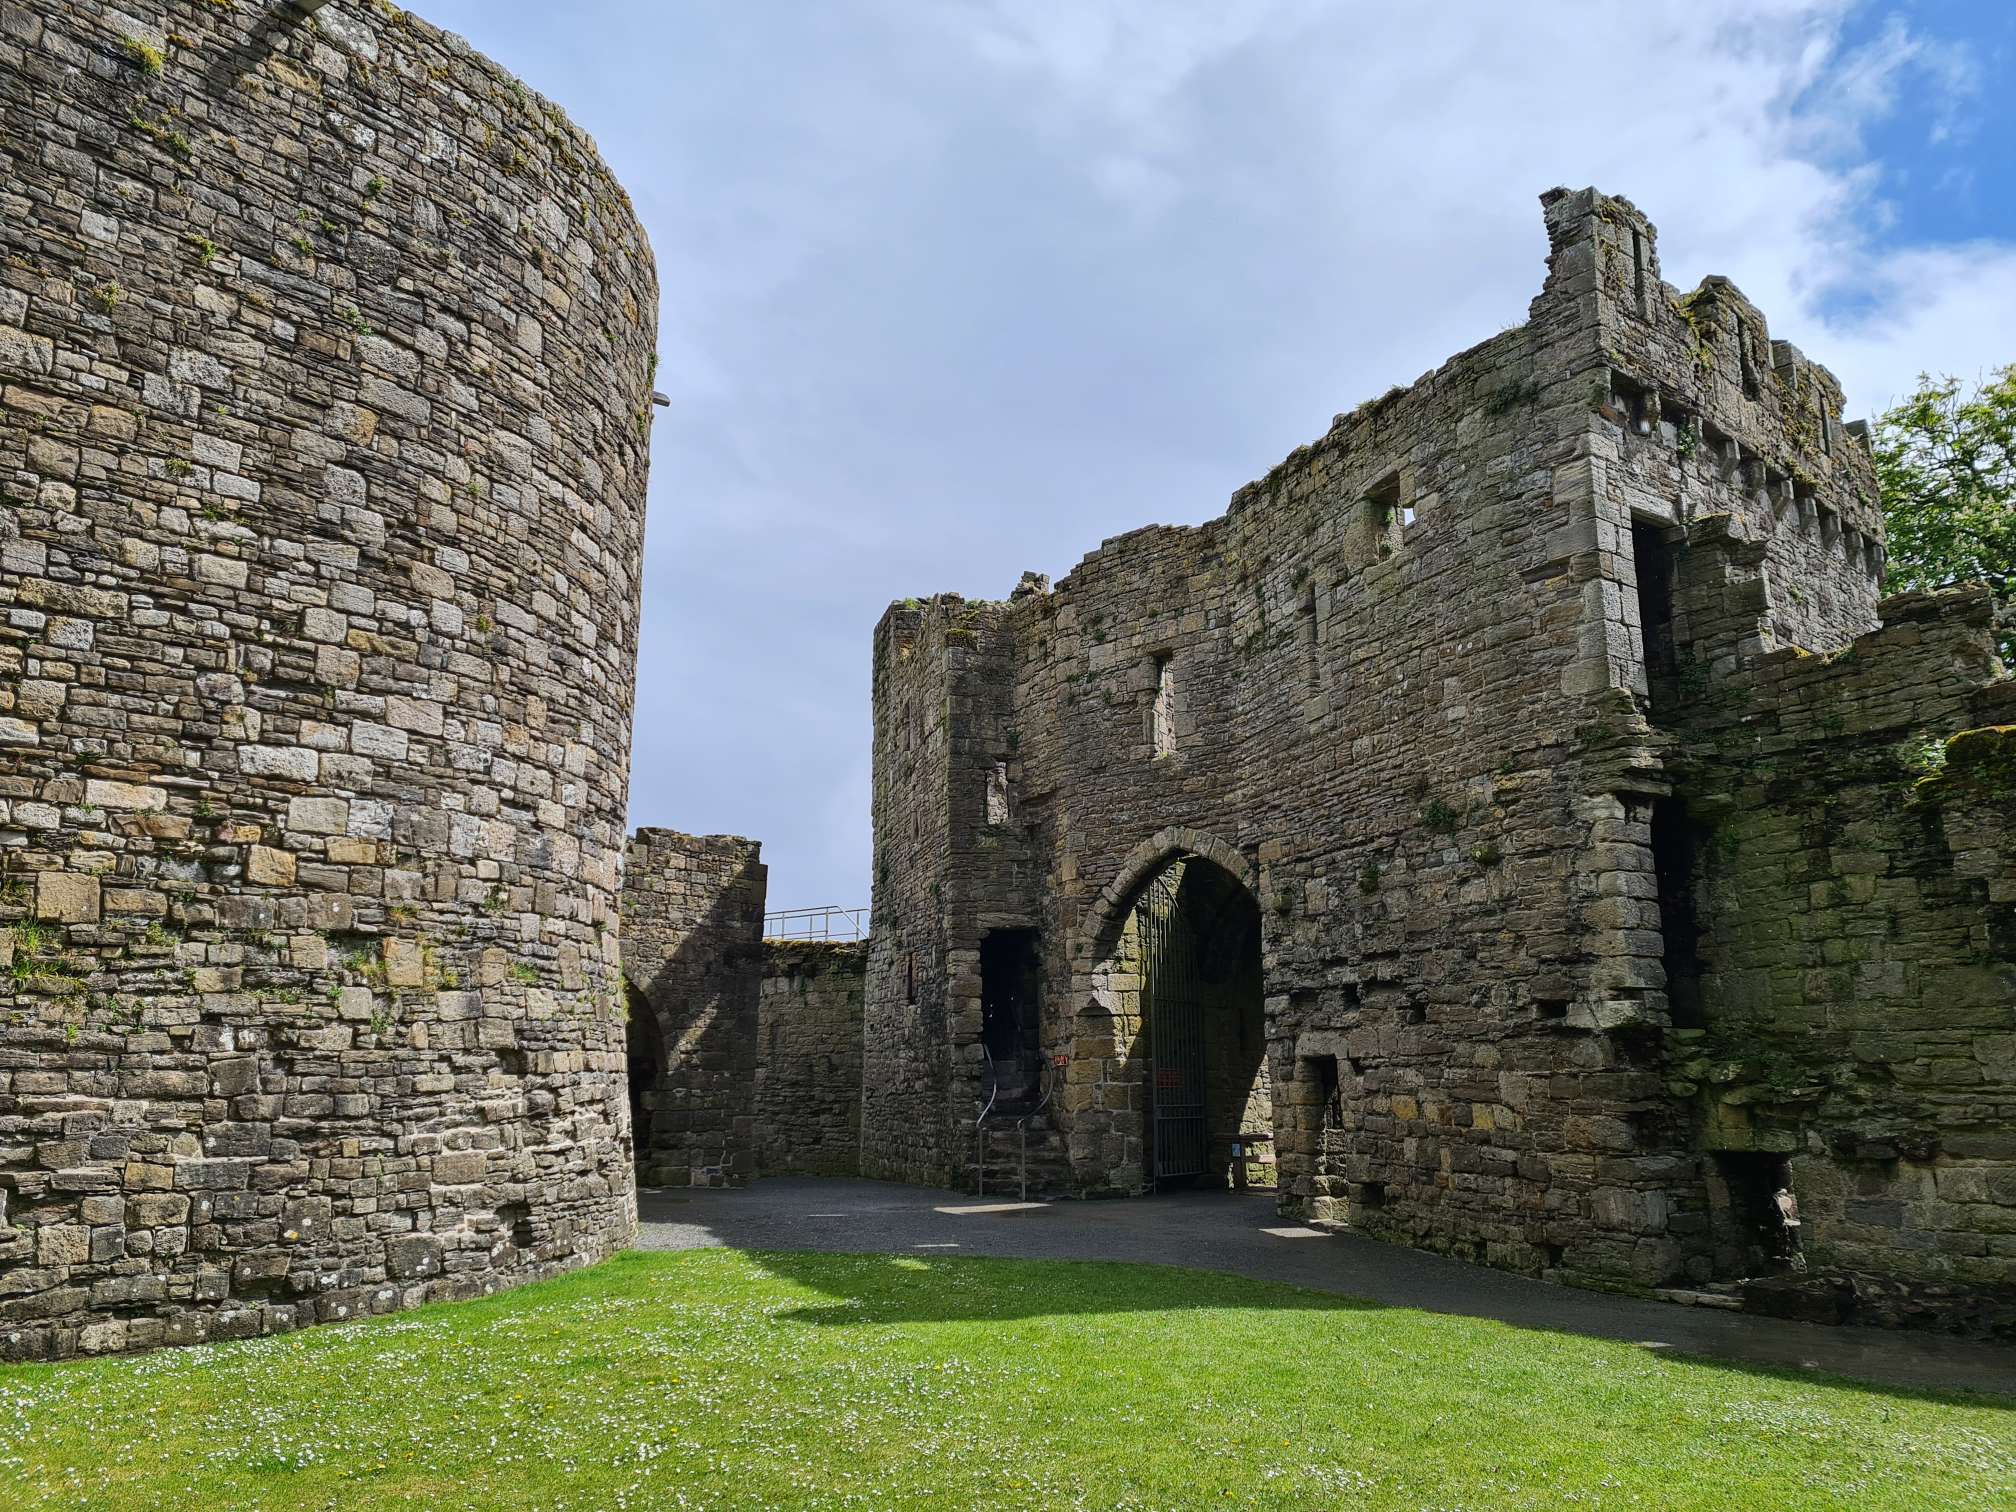 Internal view of front entrance to Beaumaris Castle